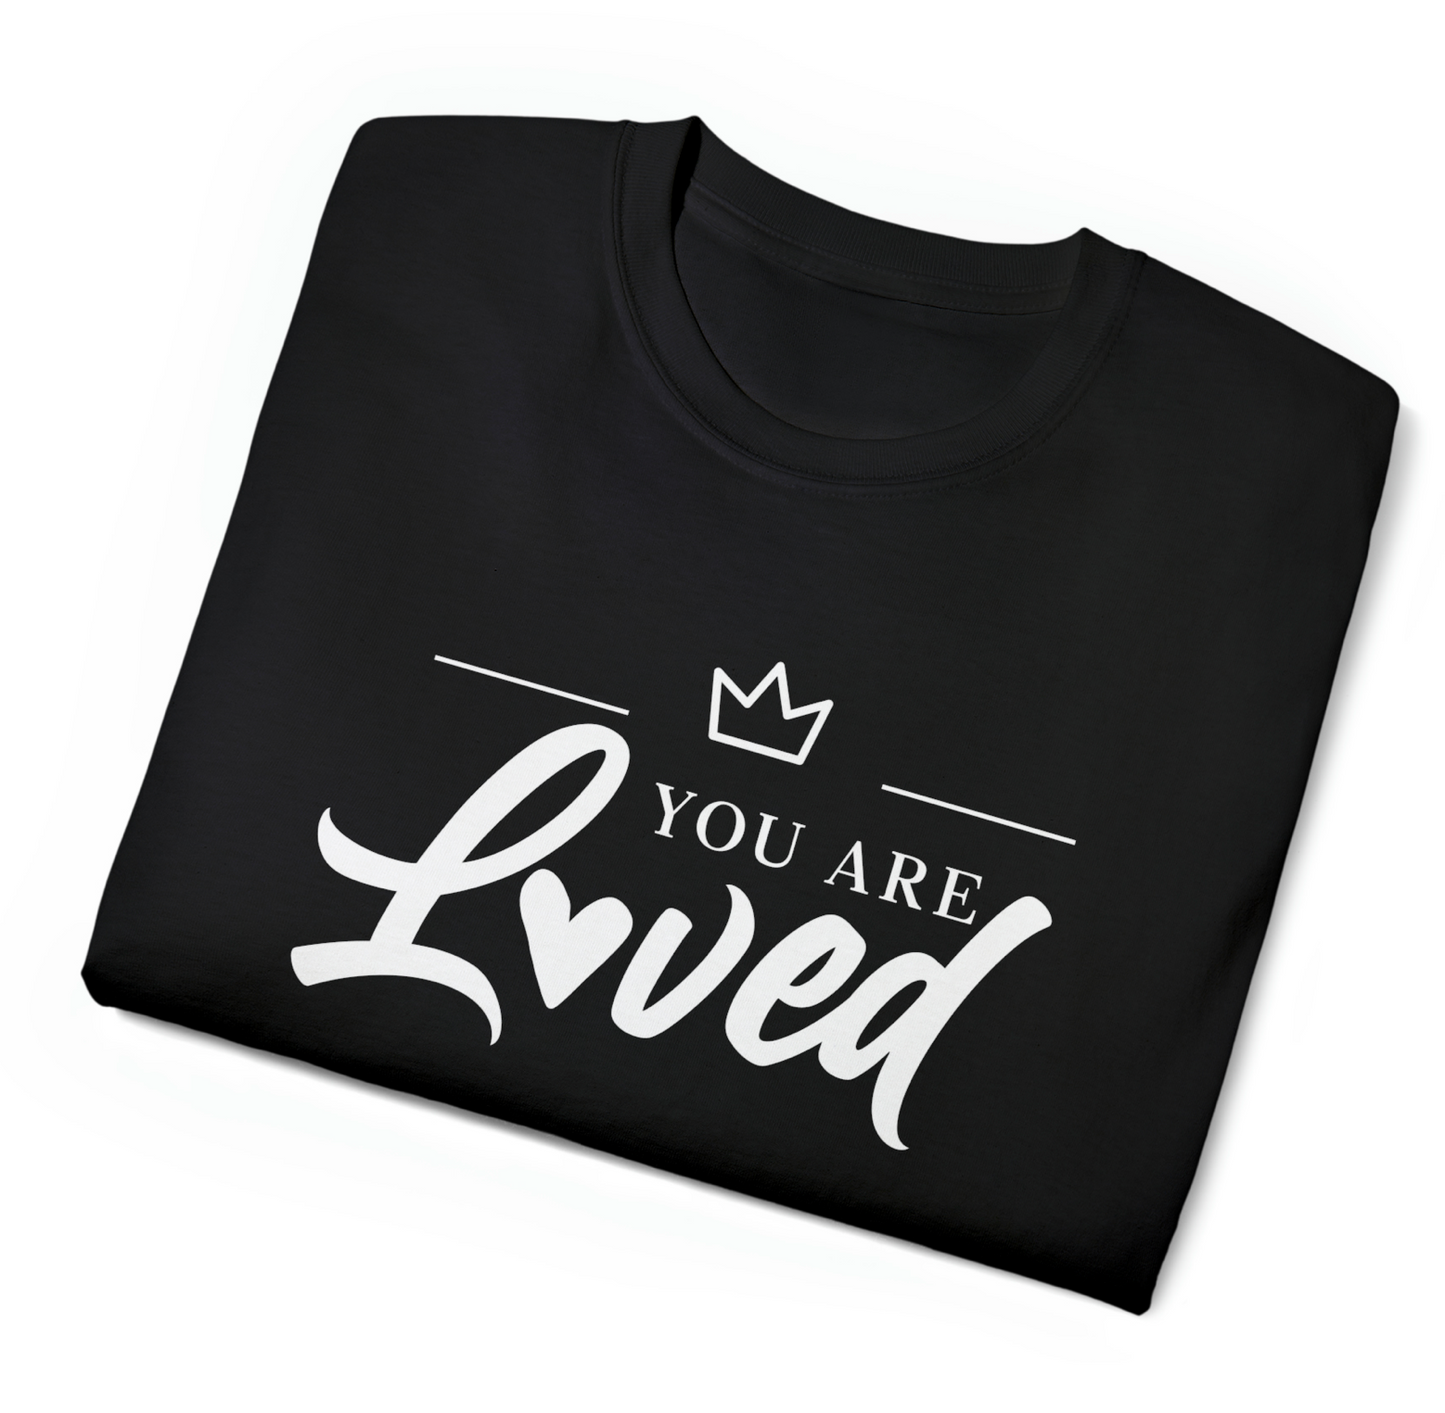 ADULT UNISEX: You Are Loved T-SHIRTS